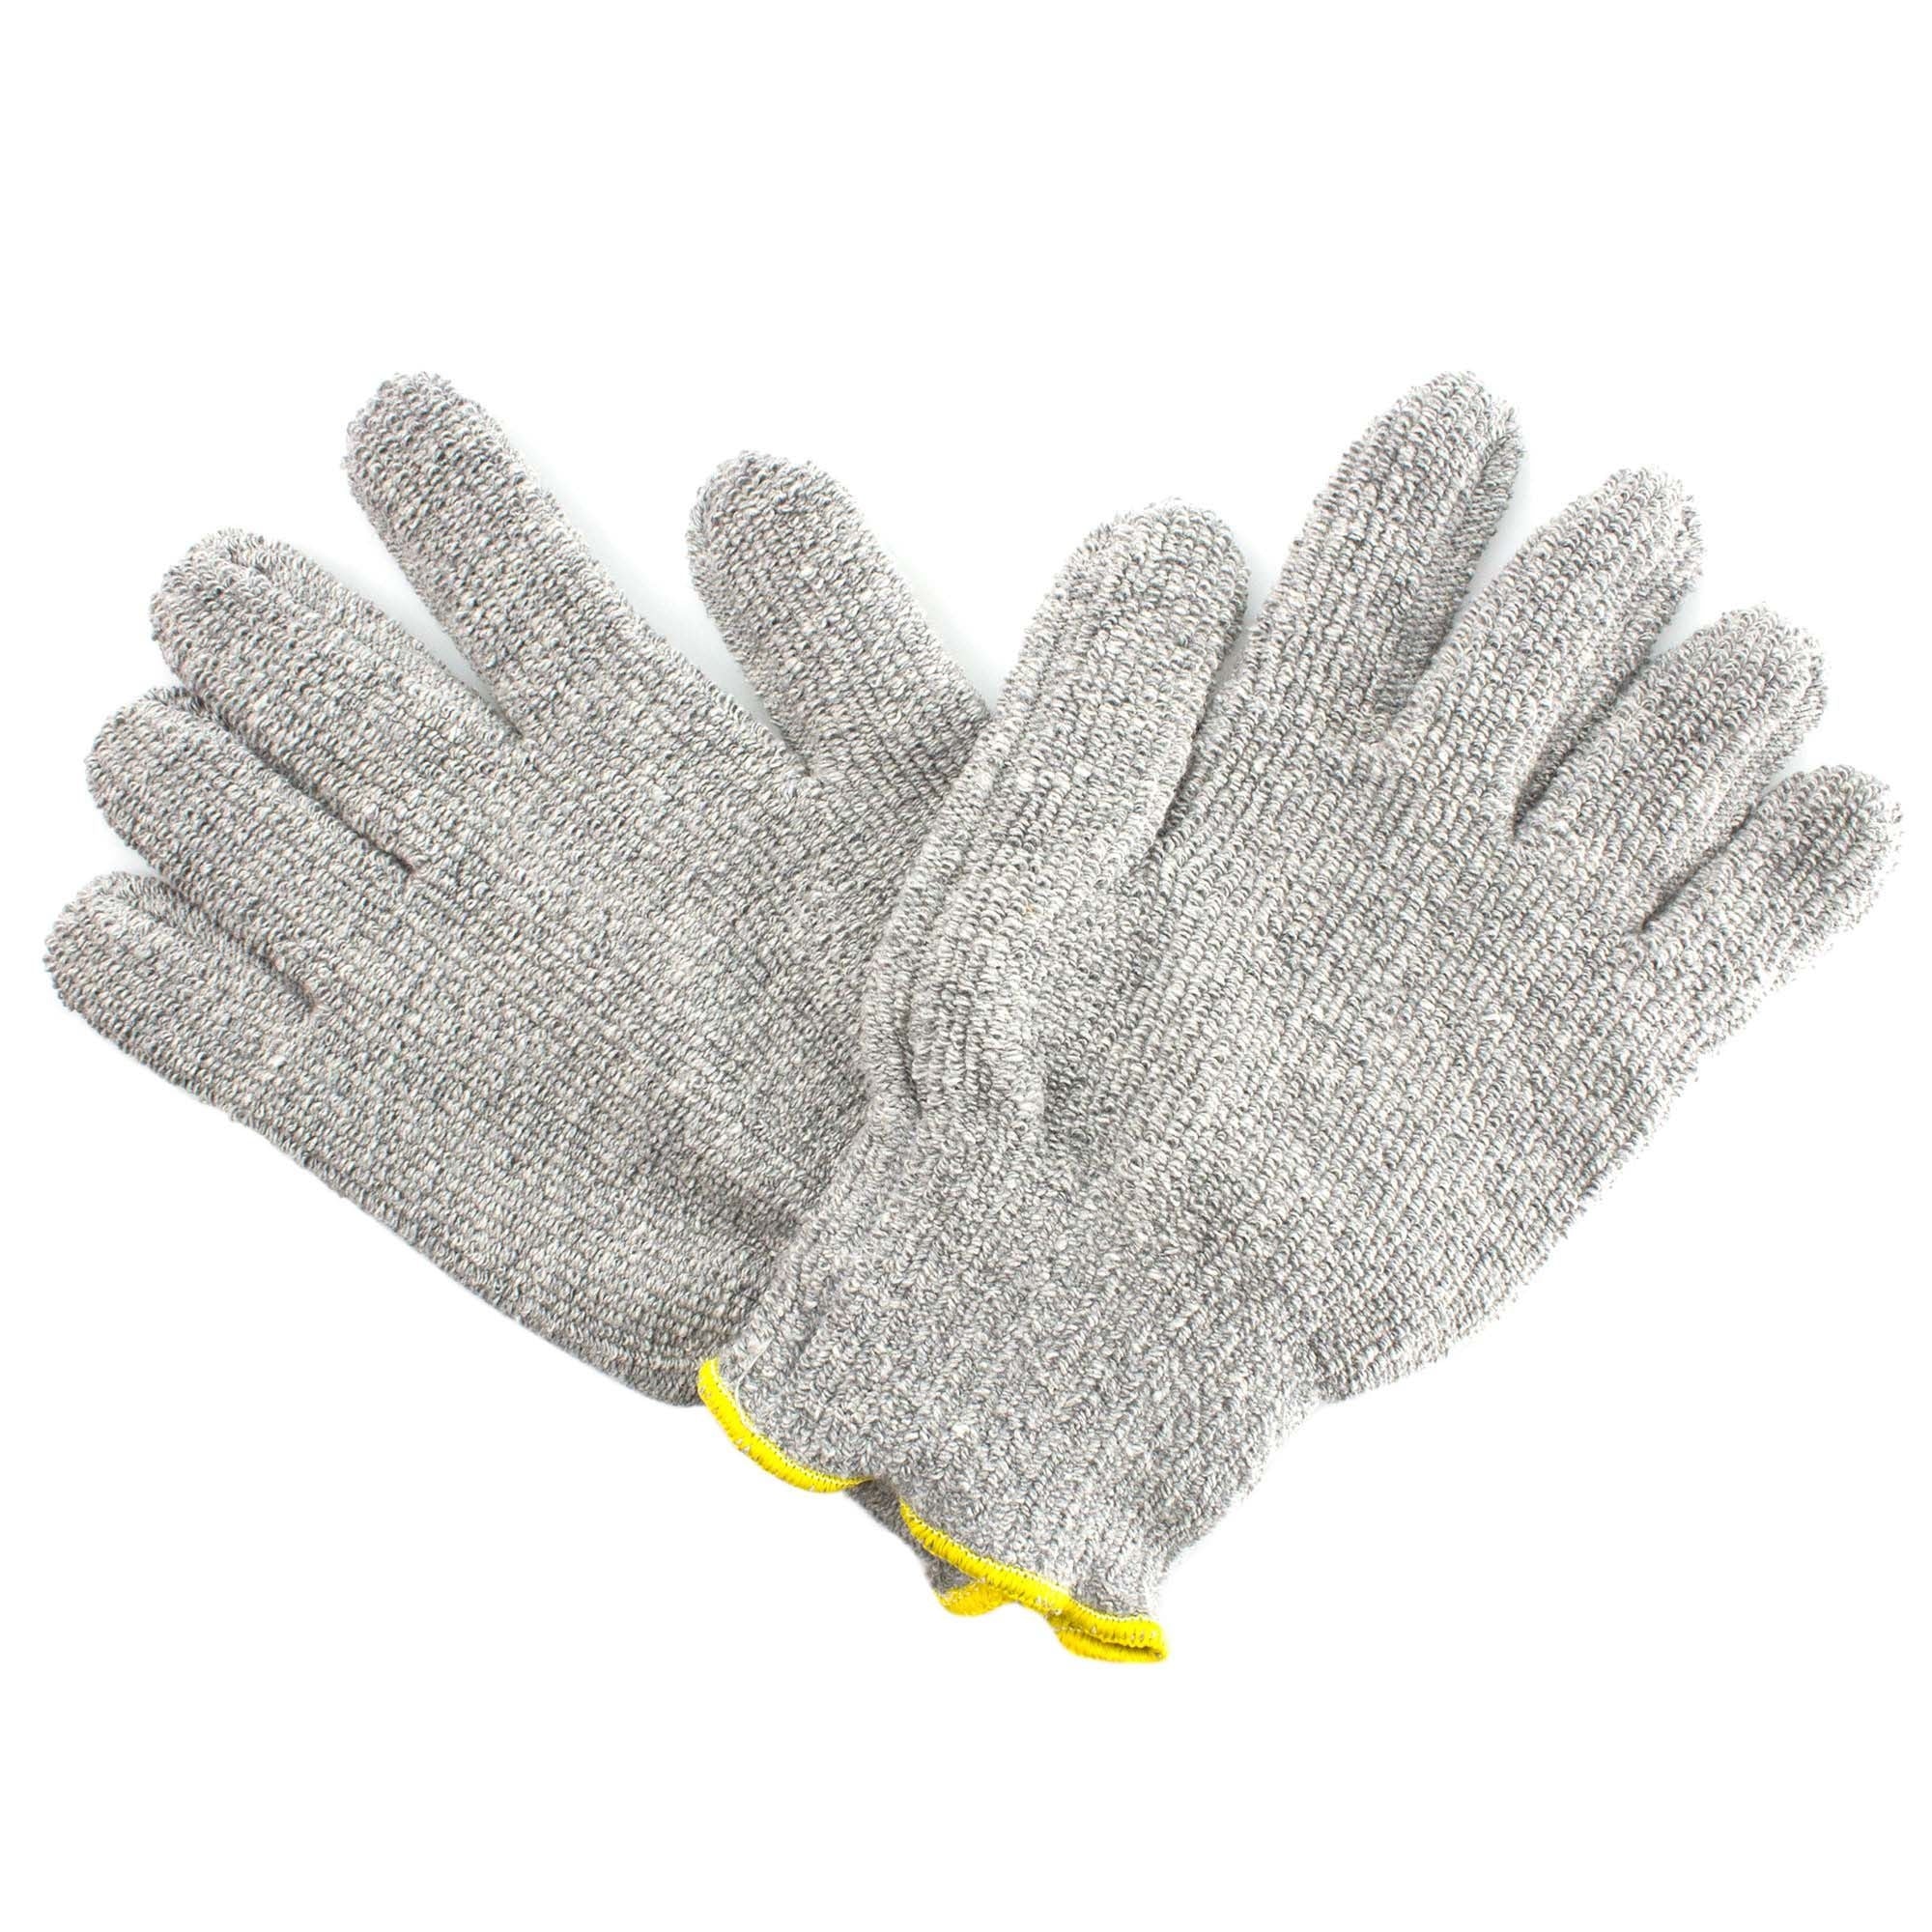 Mr Babache Fire Gloves - Pair